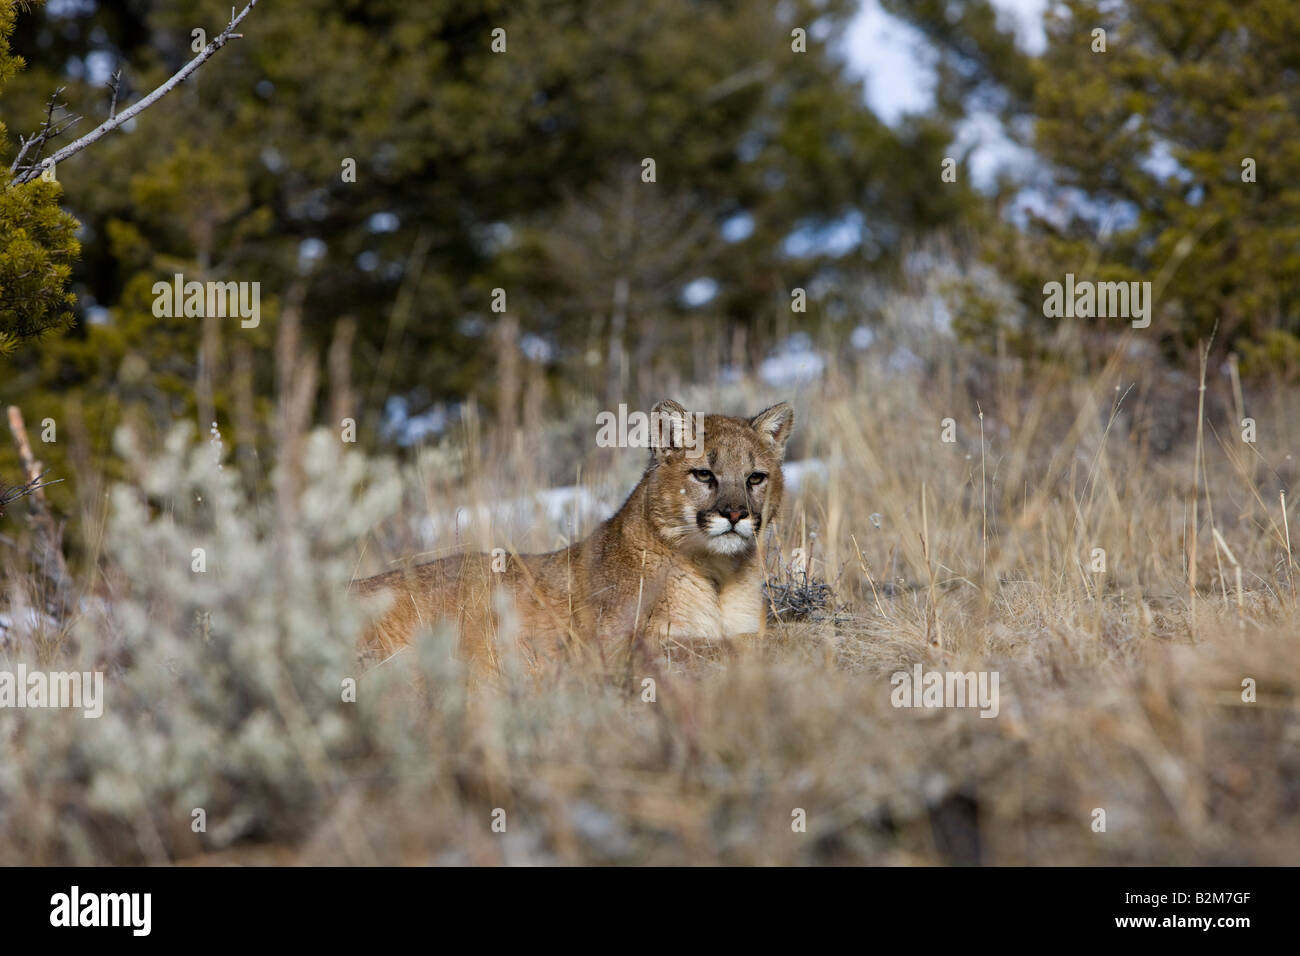 A young mountain lion resting in sage grasses. (captive) Stock Photo